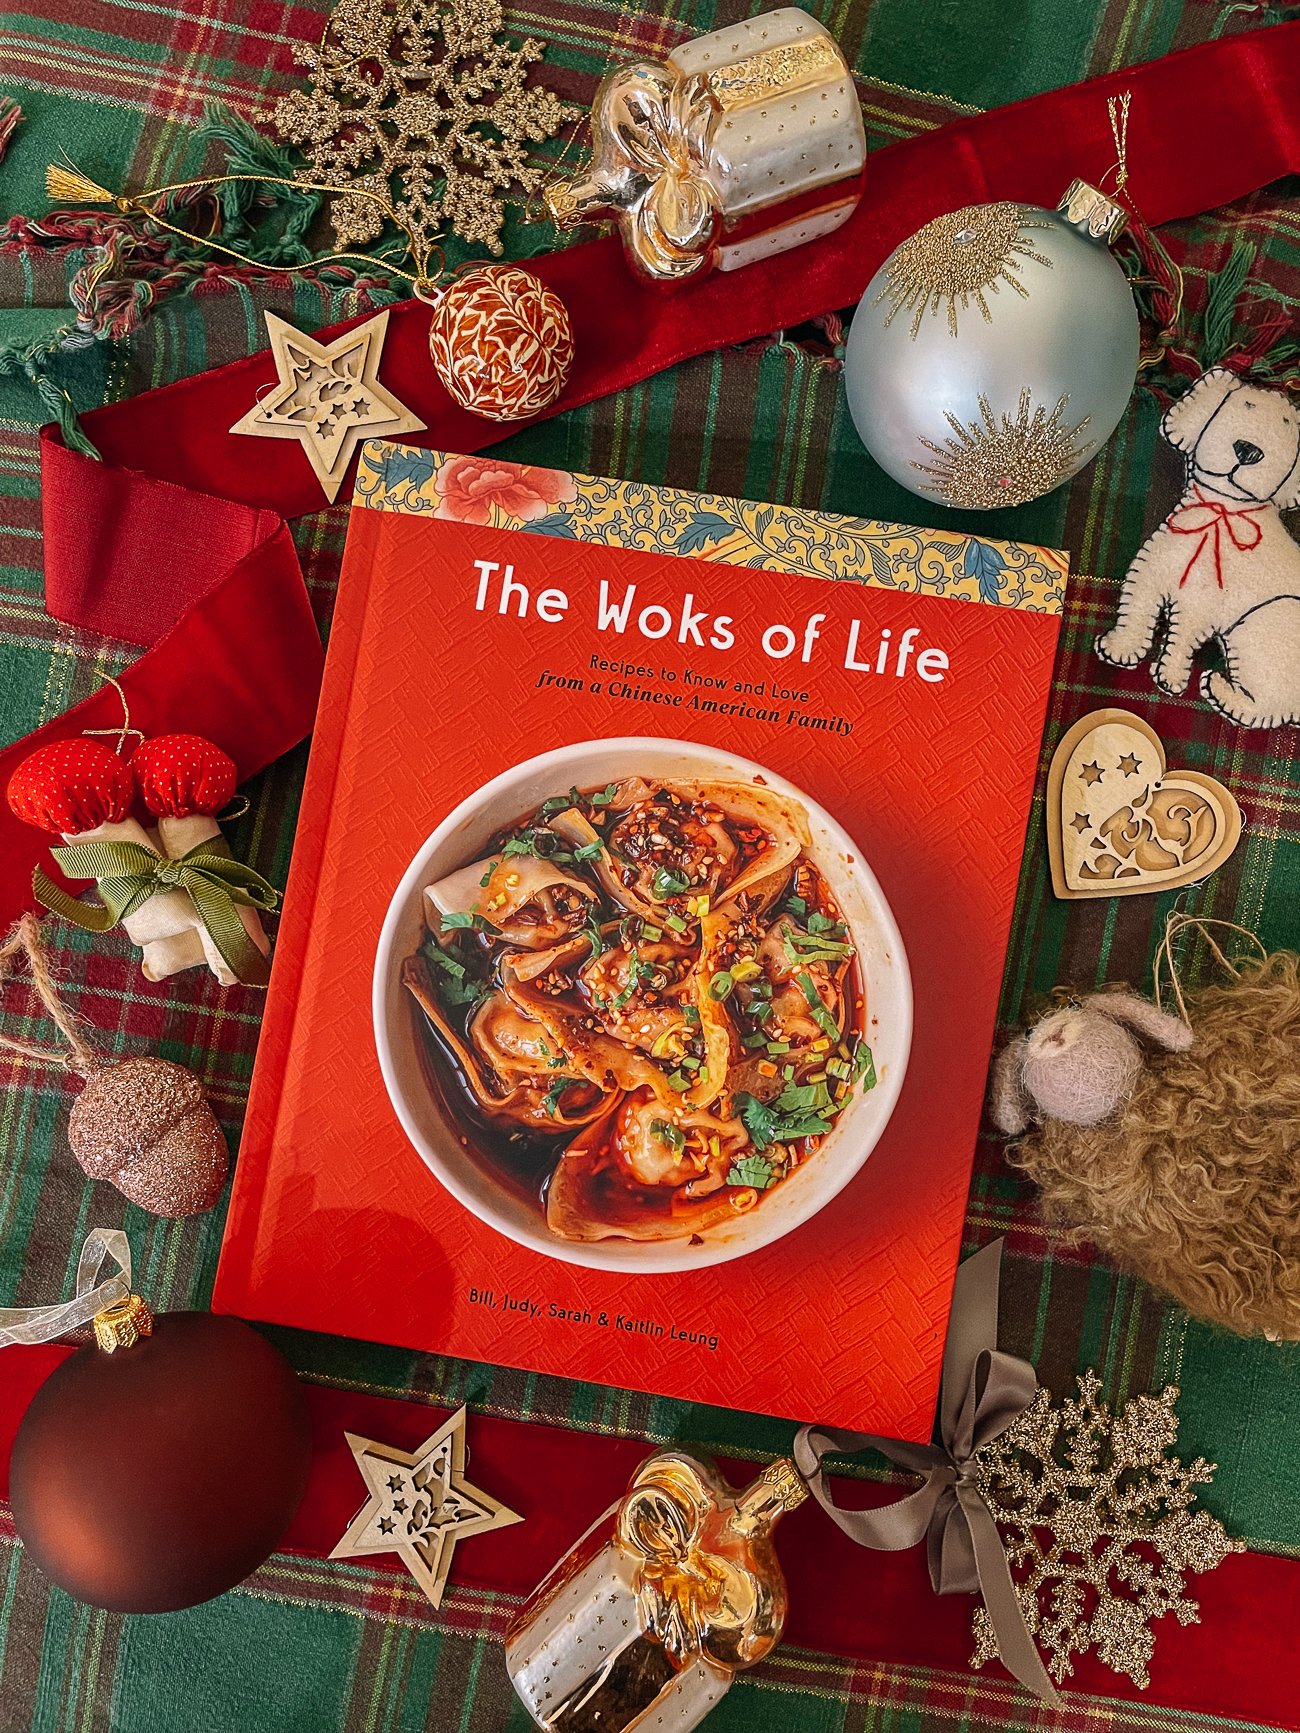 The Woks of Life Cookbook with cozy Christmas ornaments around it